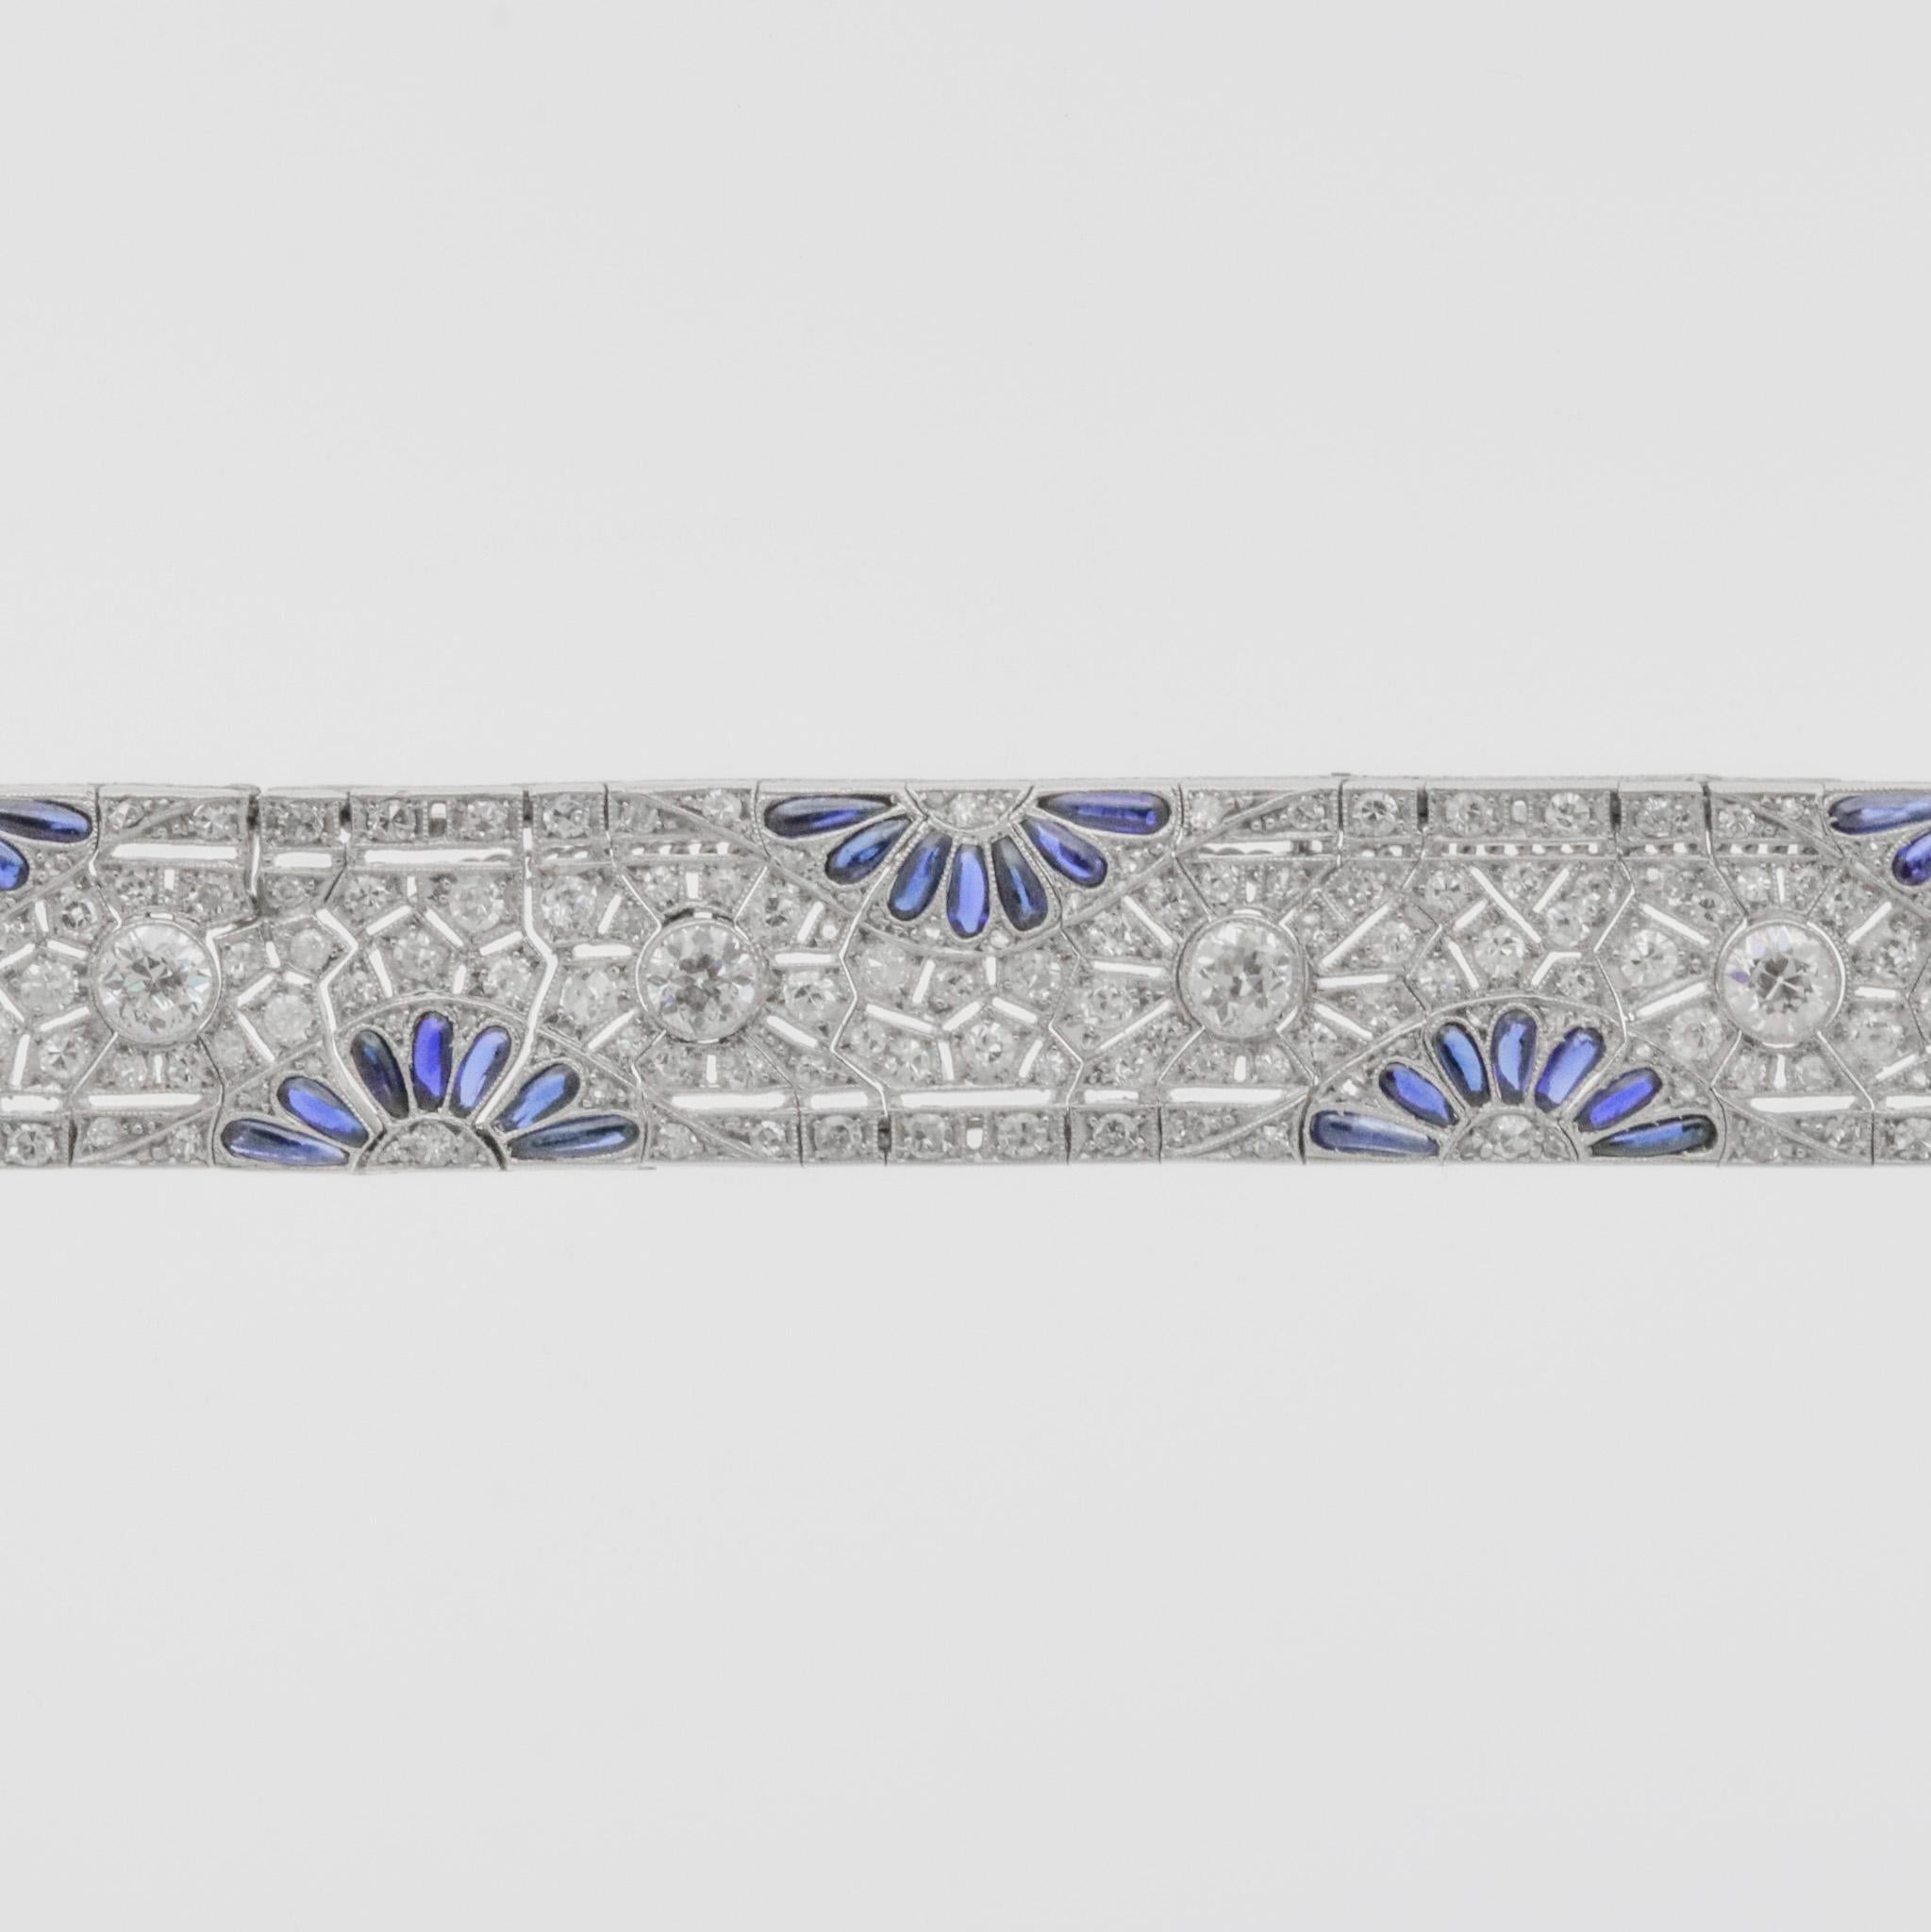 A stunning bracelet from the popular Art Deco era, circa 1920’s. It features approximately 7 carats of round European-cut and single-cut diamonds set across the piece in a geometric style. They are accented by sprays of blue sapphires adding color